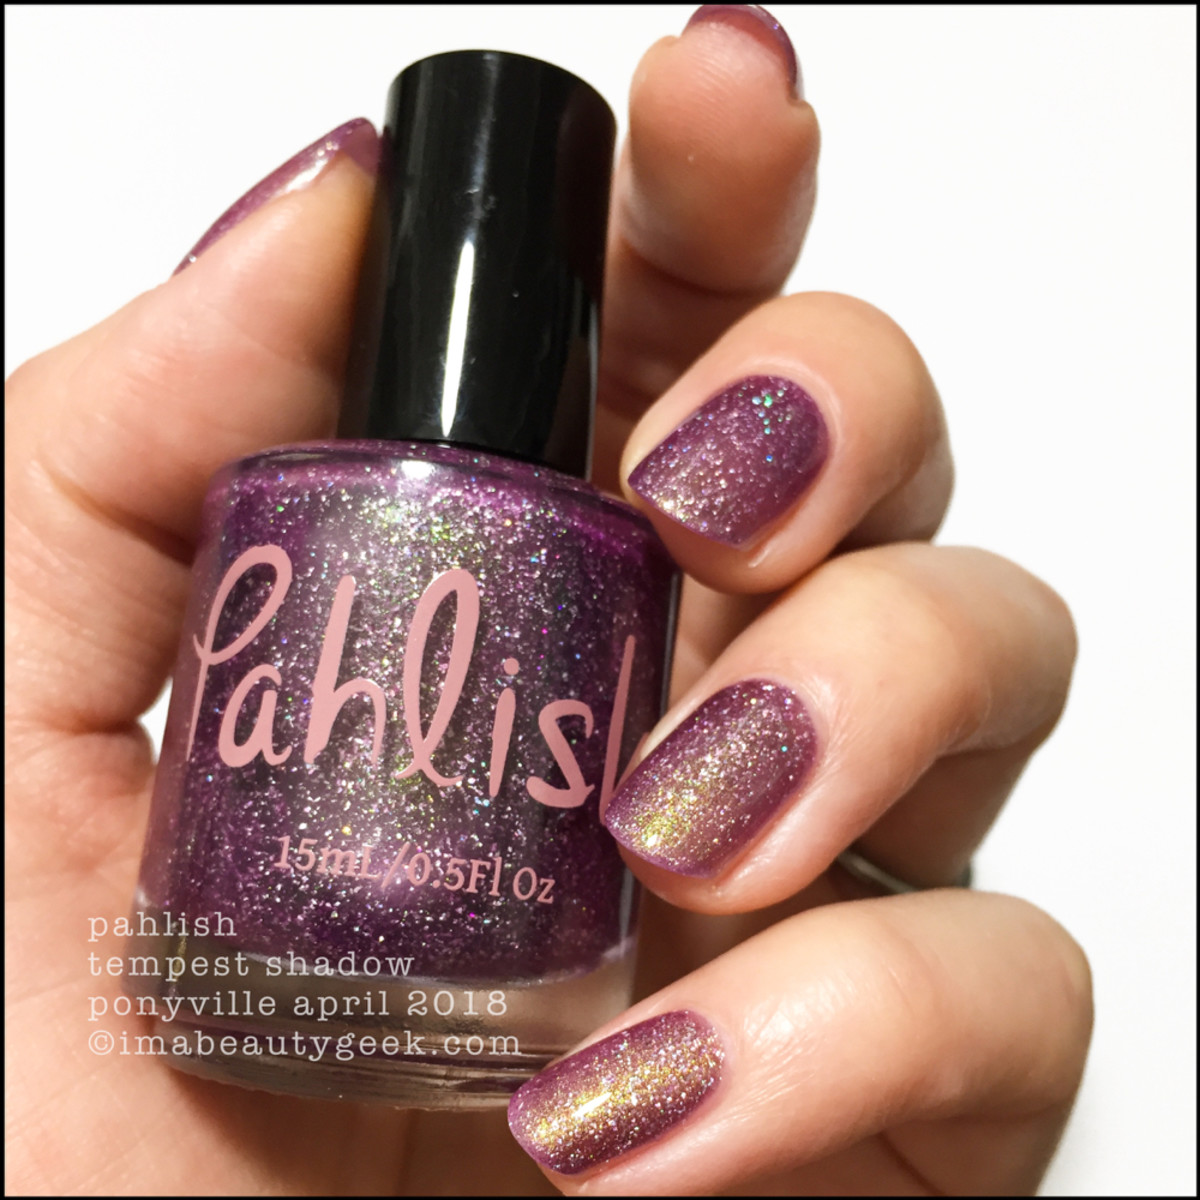 Pahlish Tempest Shadow 2 - Pahlish Ponyville Collection April 2018